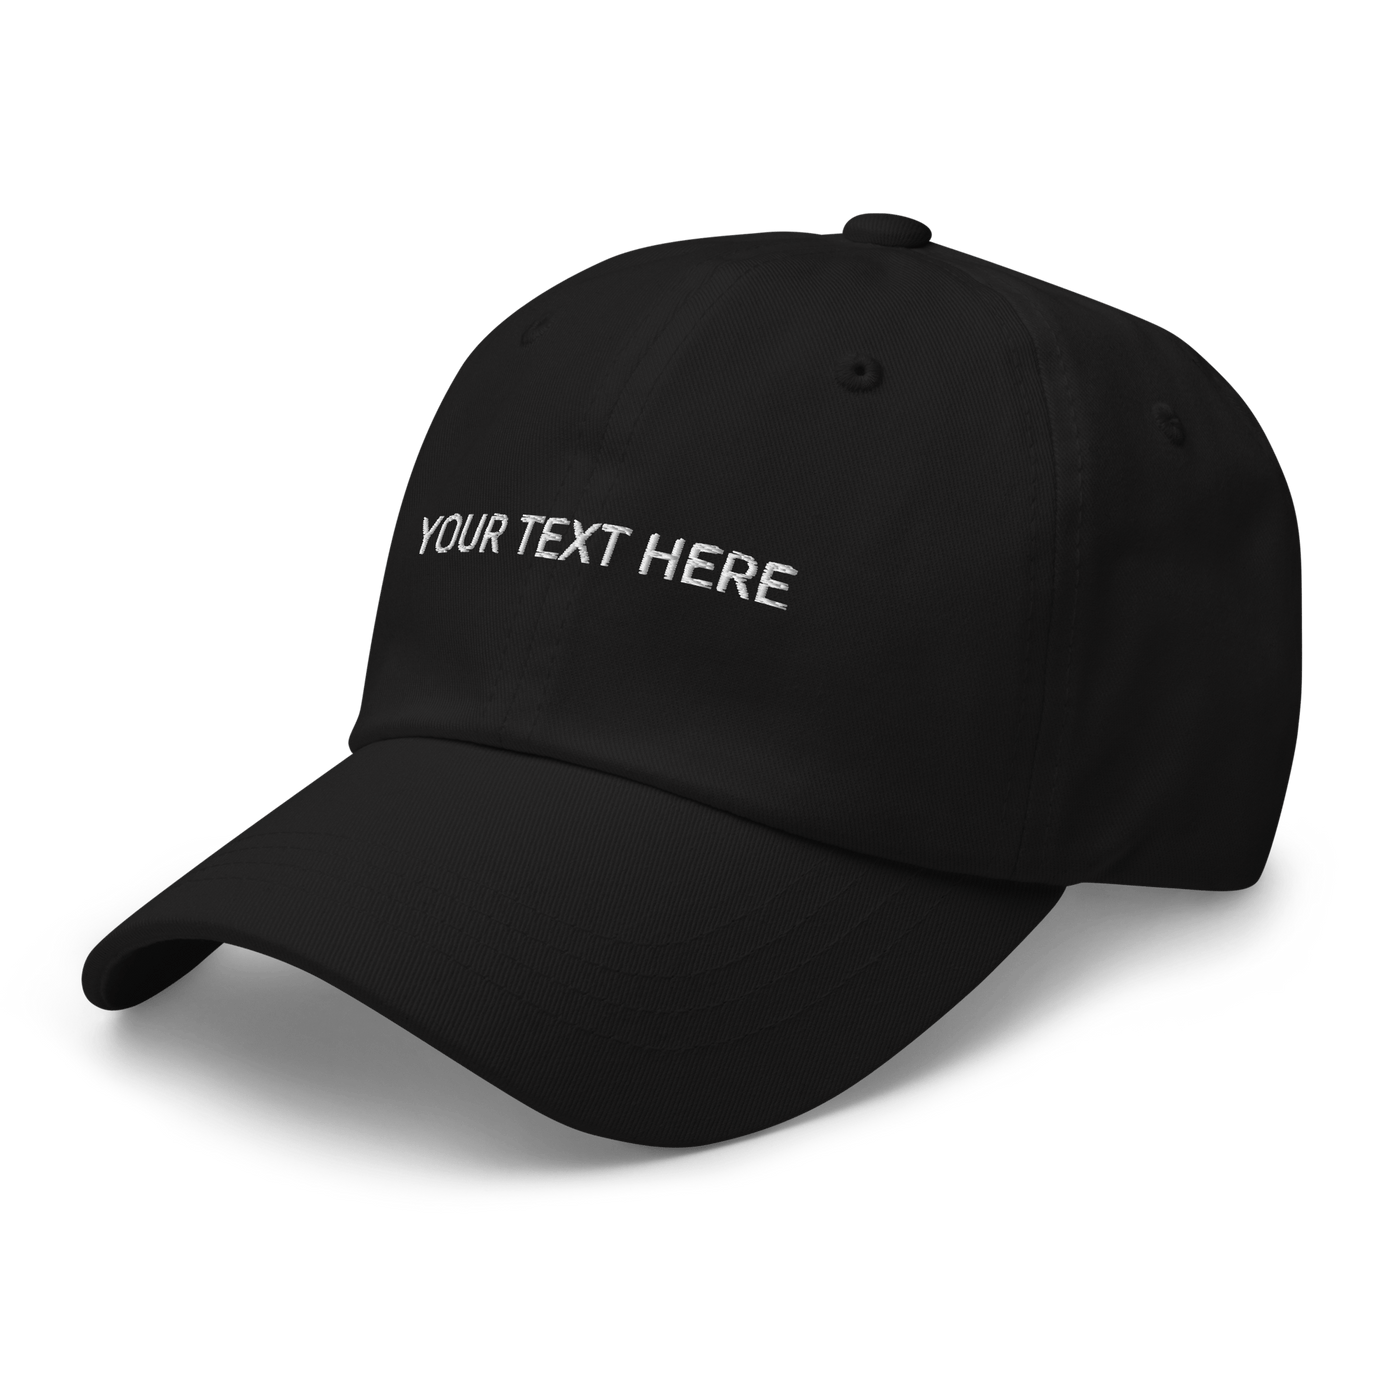 Customize Your own Dad Hat - Black - - Just Another Cap Store